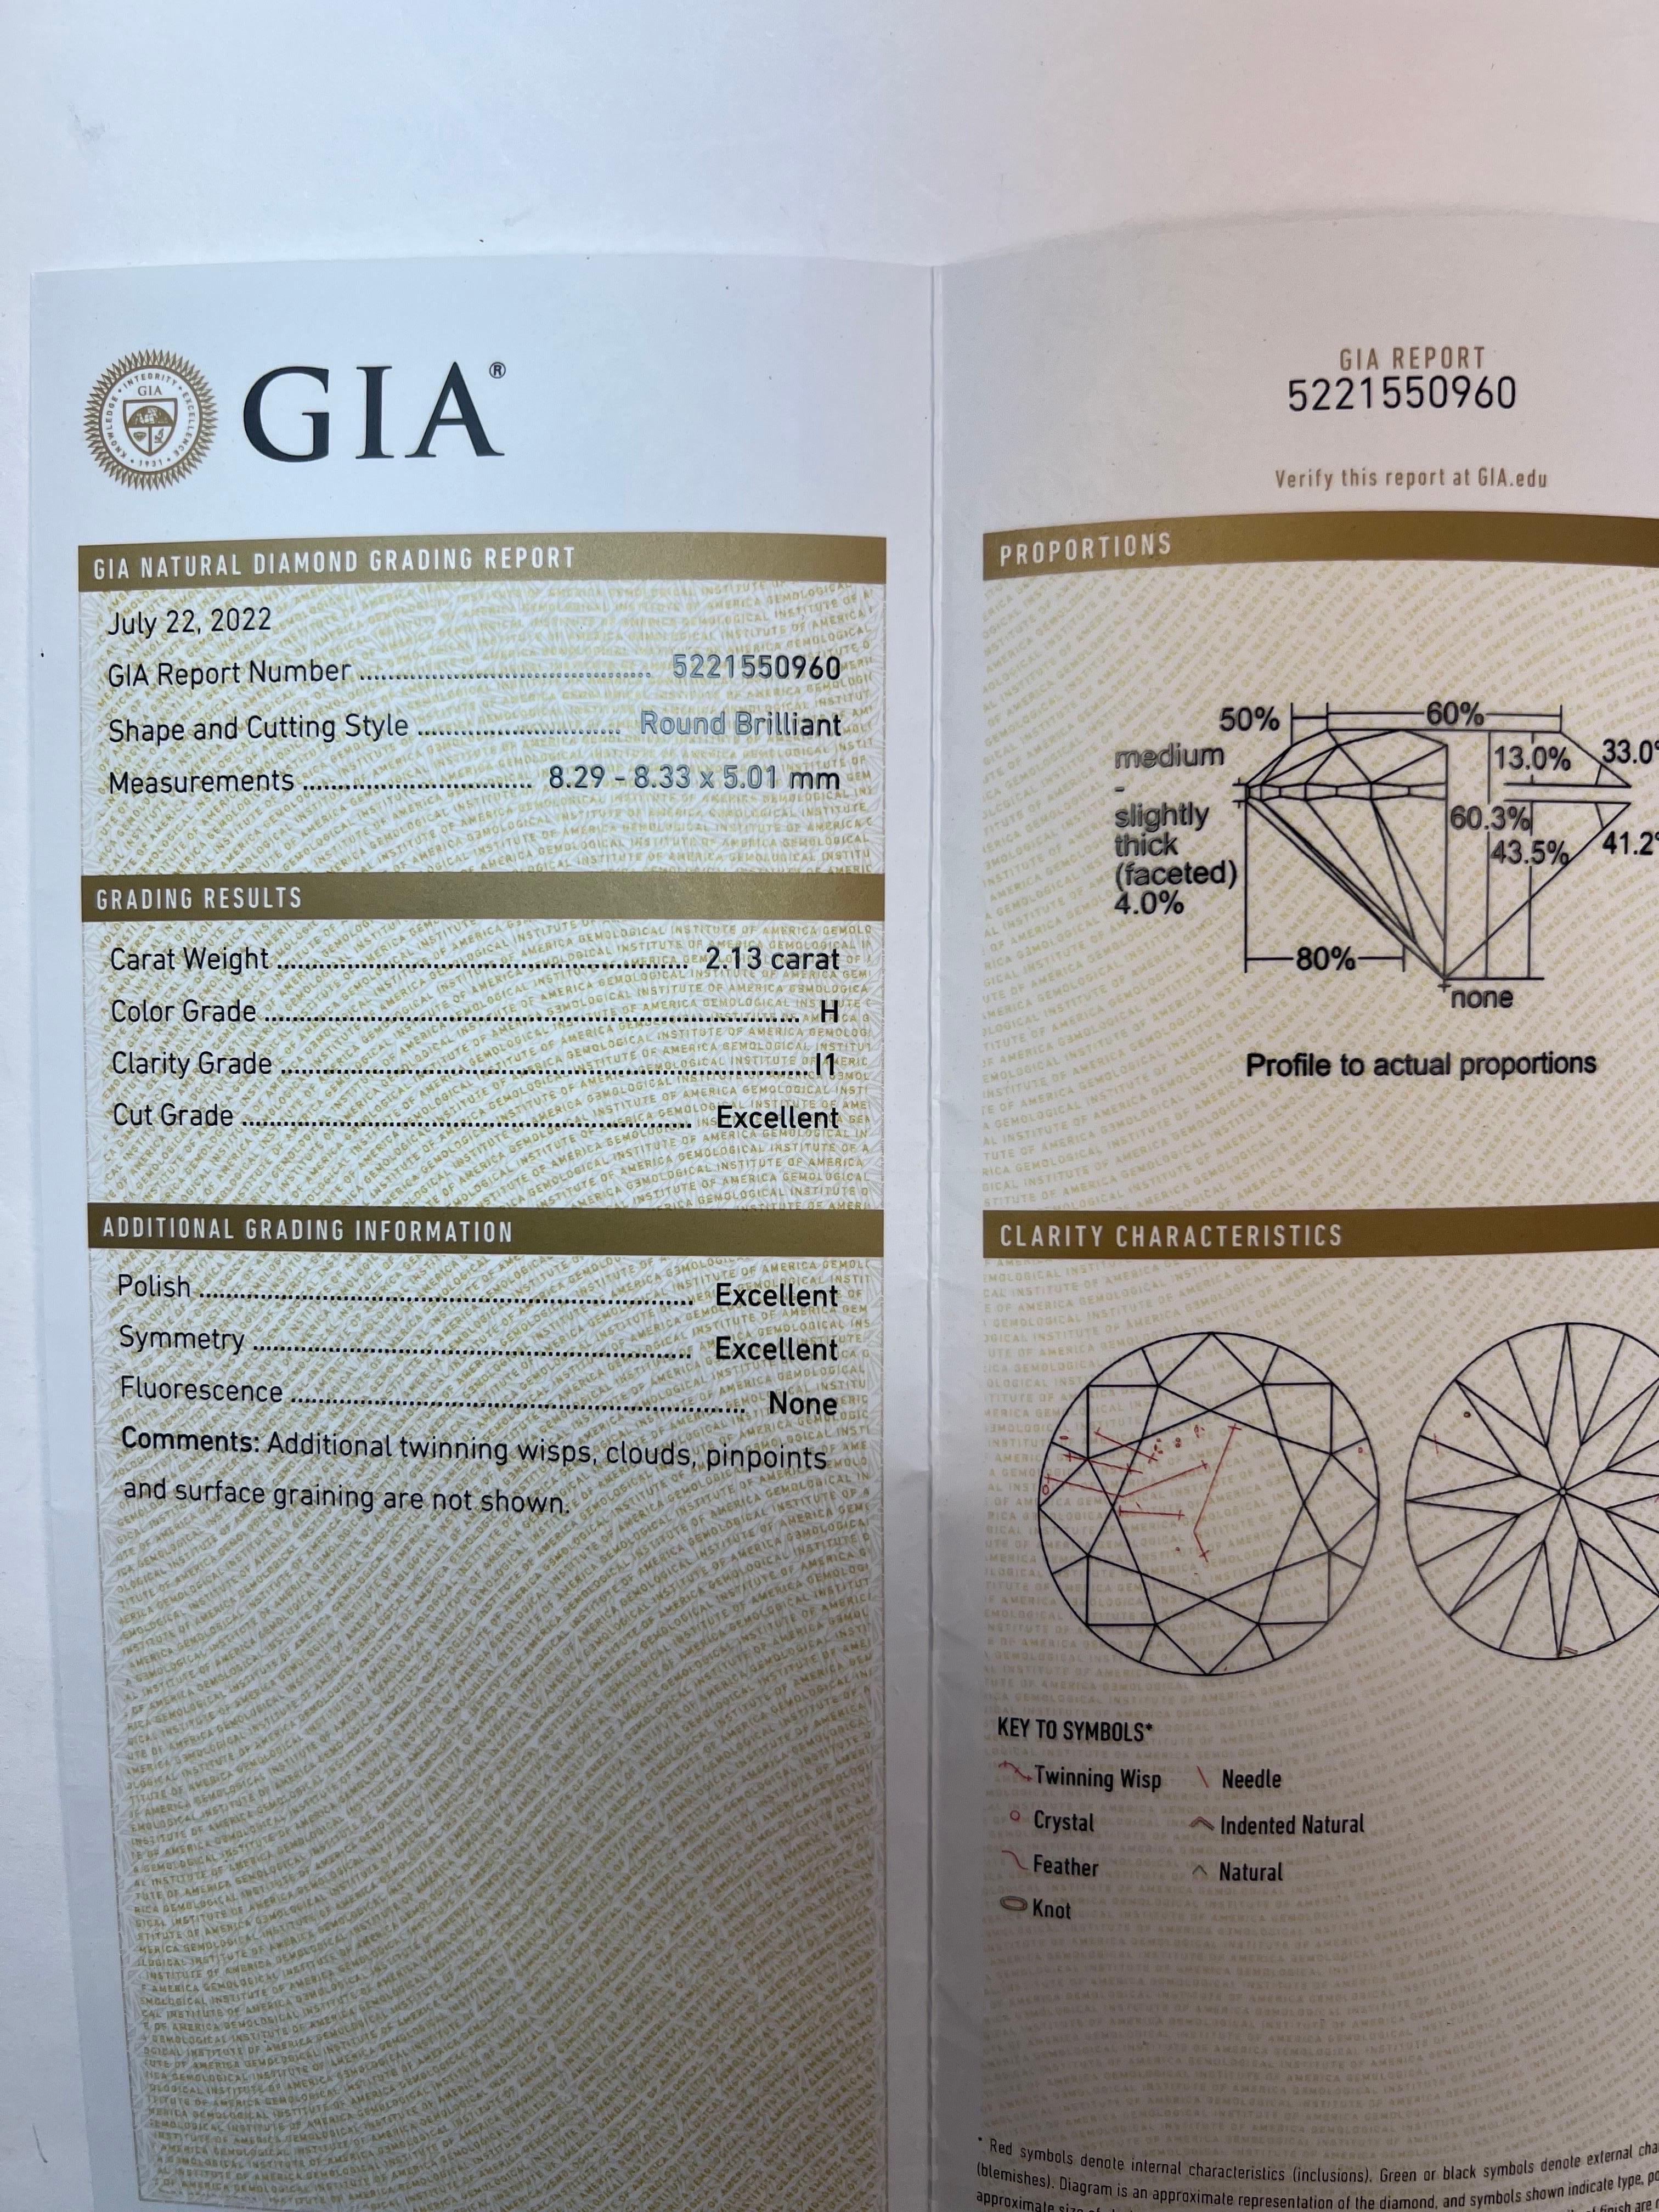 Modern 4.24 Carat Natural GIA Certified H-I Color Round Brilliant Diamond Studs. The diameter of these diamonds are 8.2mm, making it face-up larger than the average two carat round. 

The first stone is a 2.11 carat I I1, Excellent Cut, Polish and